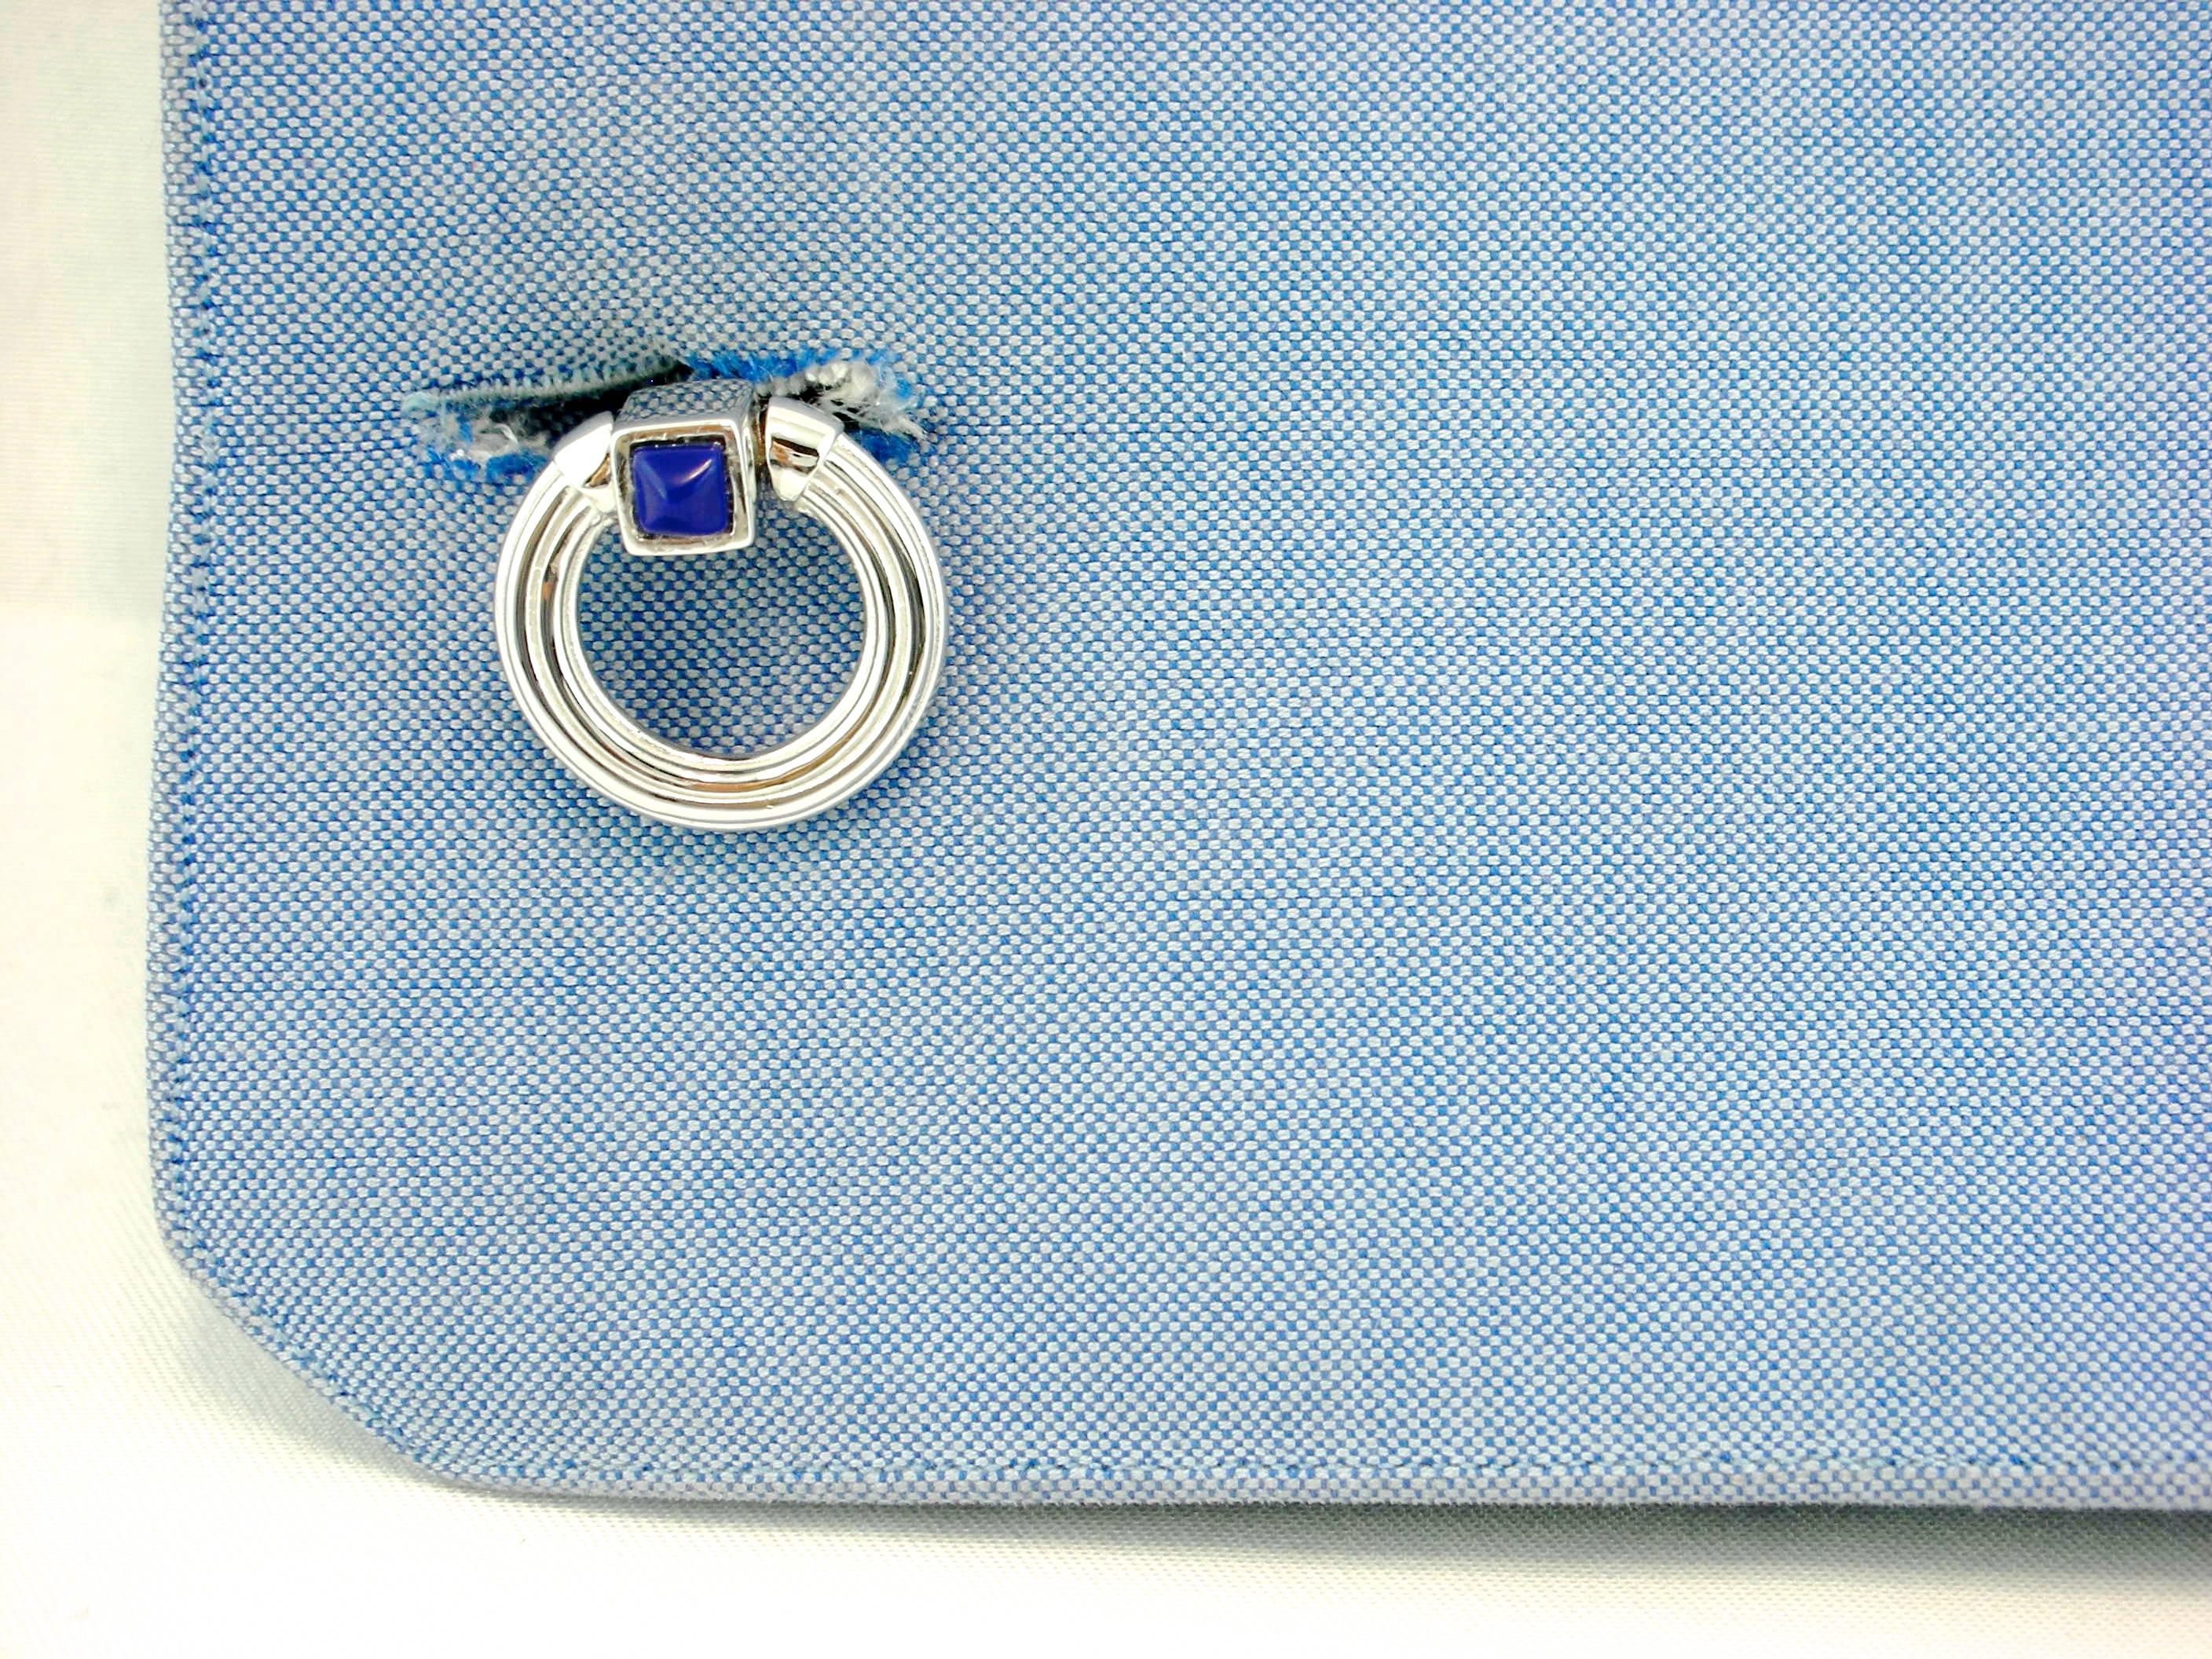 Jona design collection, hand crafted in Italy, rhodium plated sterling silver double ring folding cufflinks with Lapis cabochons. Marked JONA 925.
These links push through the shirt cuff and fold down either side to keep them locked in tightly. 
All